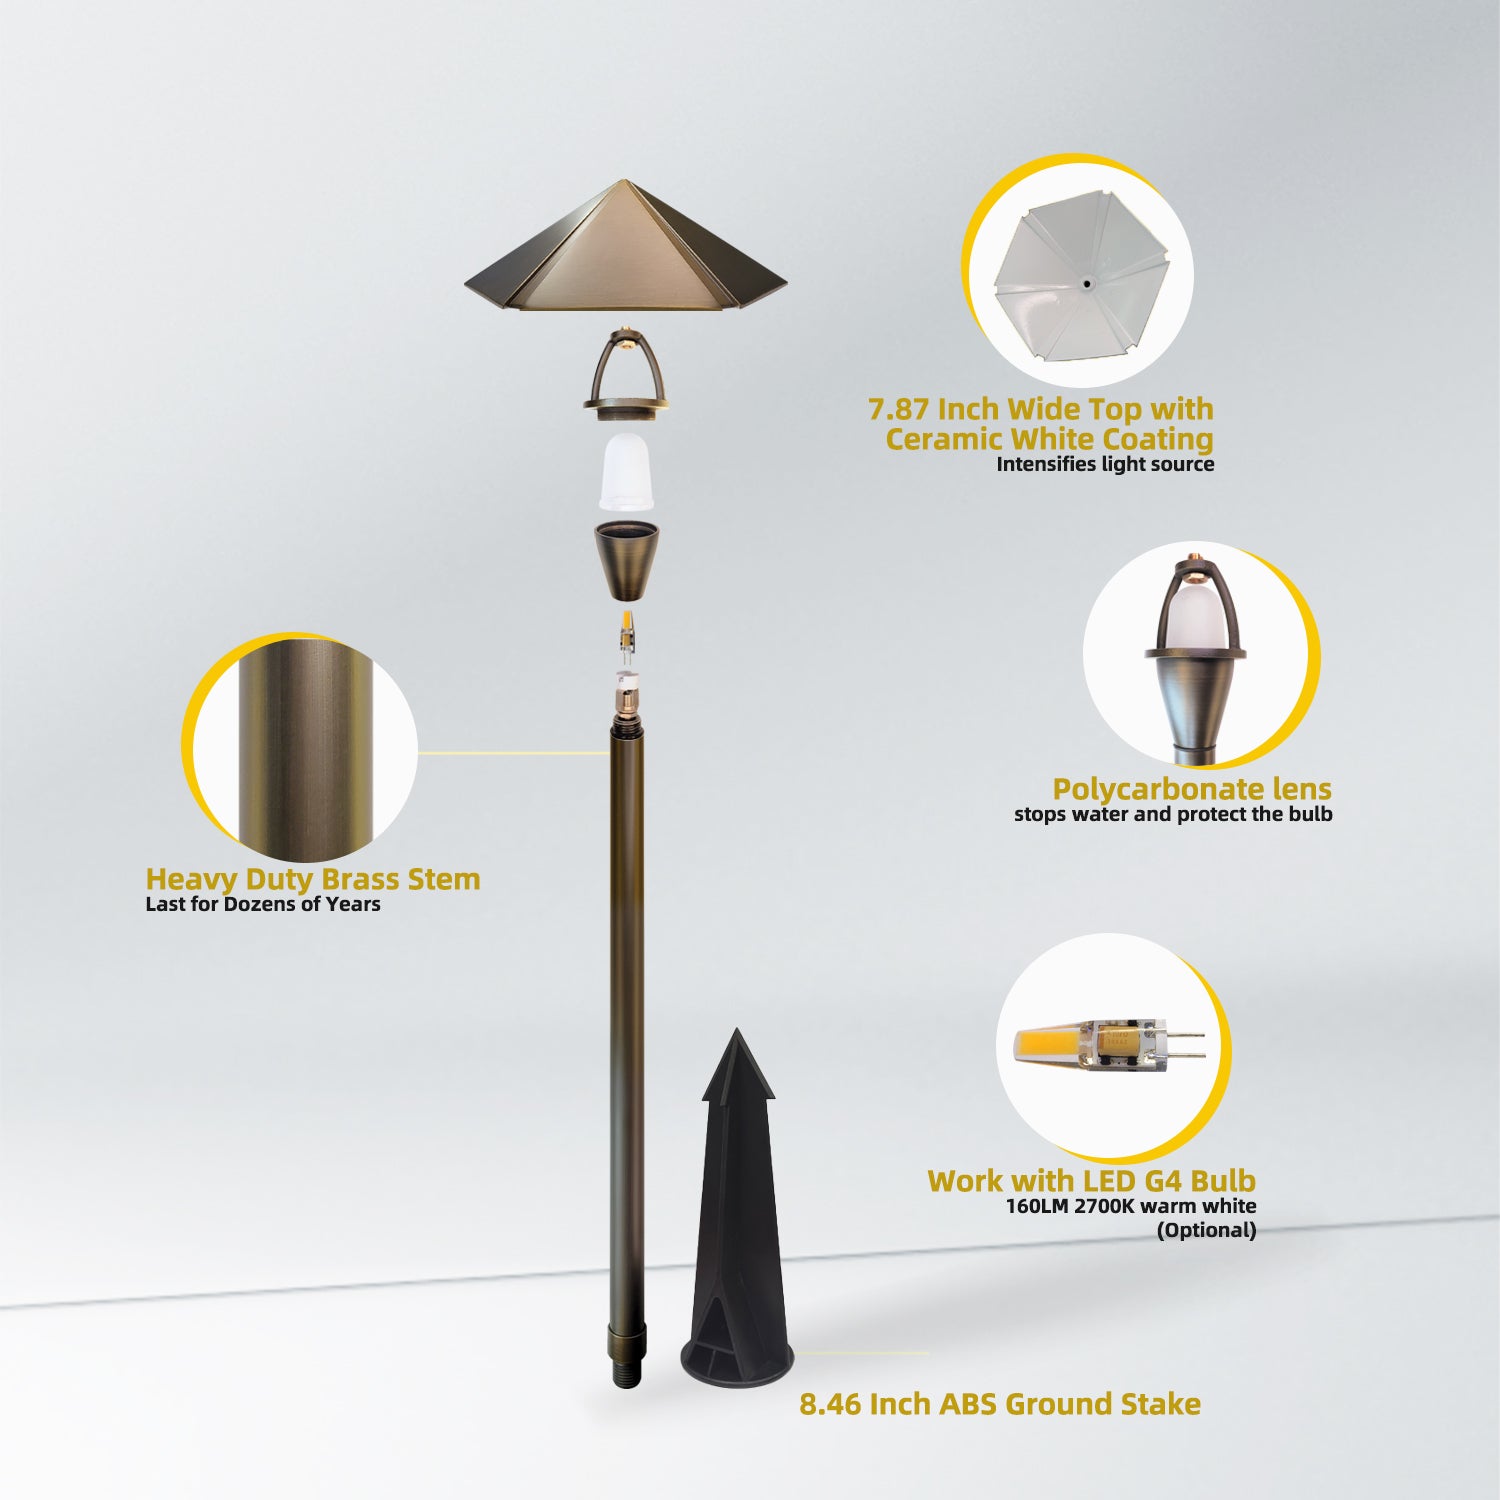 Components of 12V low voltage brass pathway light for yard COP605B. Includes 7.87 inch wide top with ceramic white coating, polycarbonate lens, heavy duty brass stem lasting for dozens of years, 8.46 inch ABS ground stake, compatible with LED G4 bulb 160LM 2700K warm white.